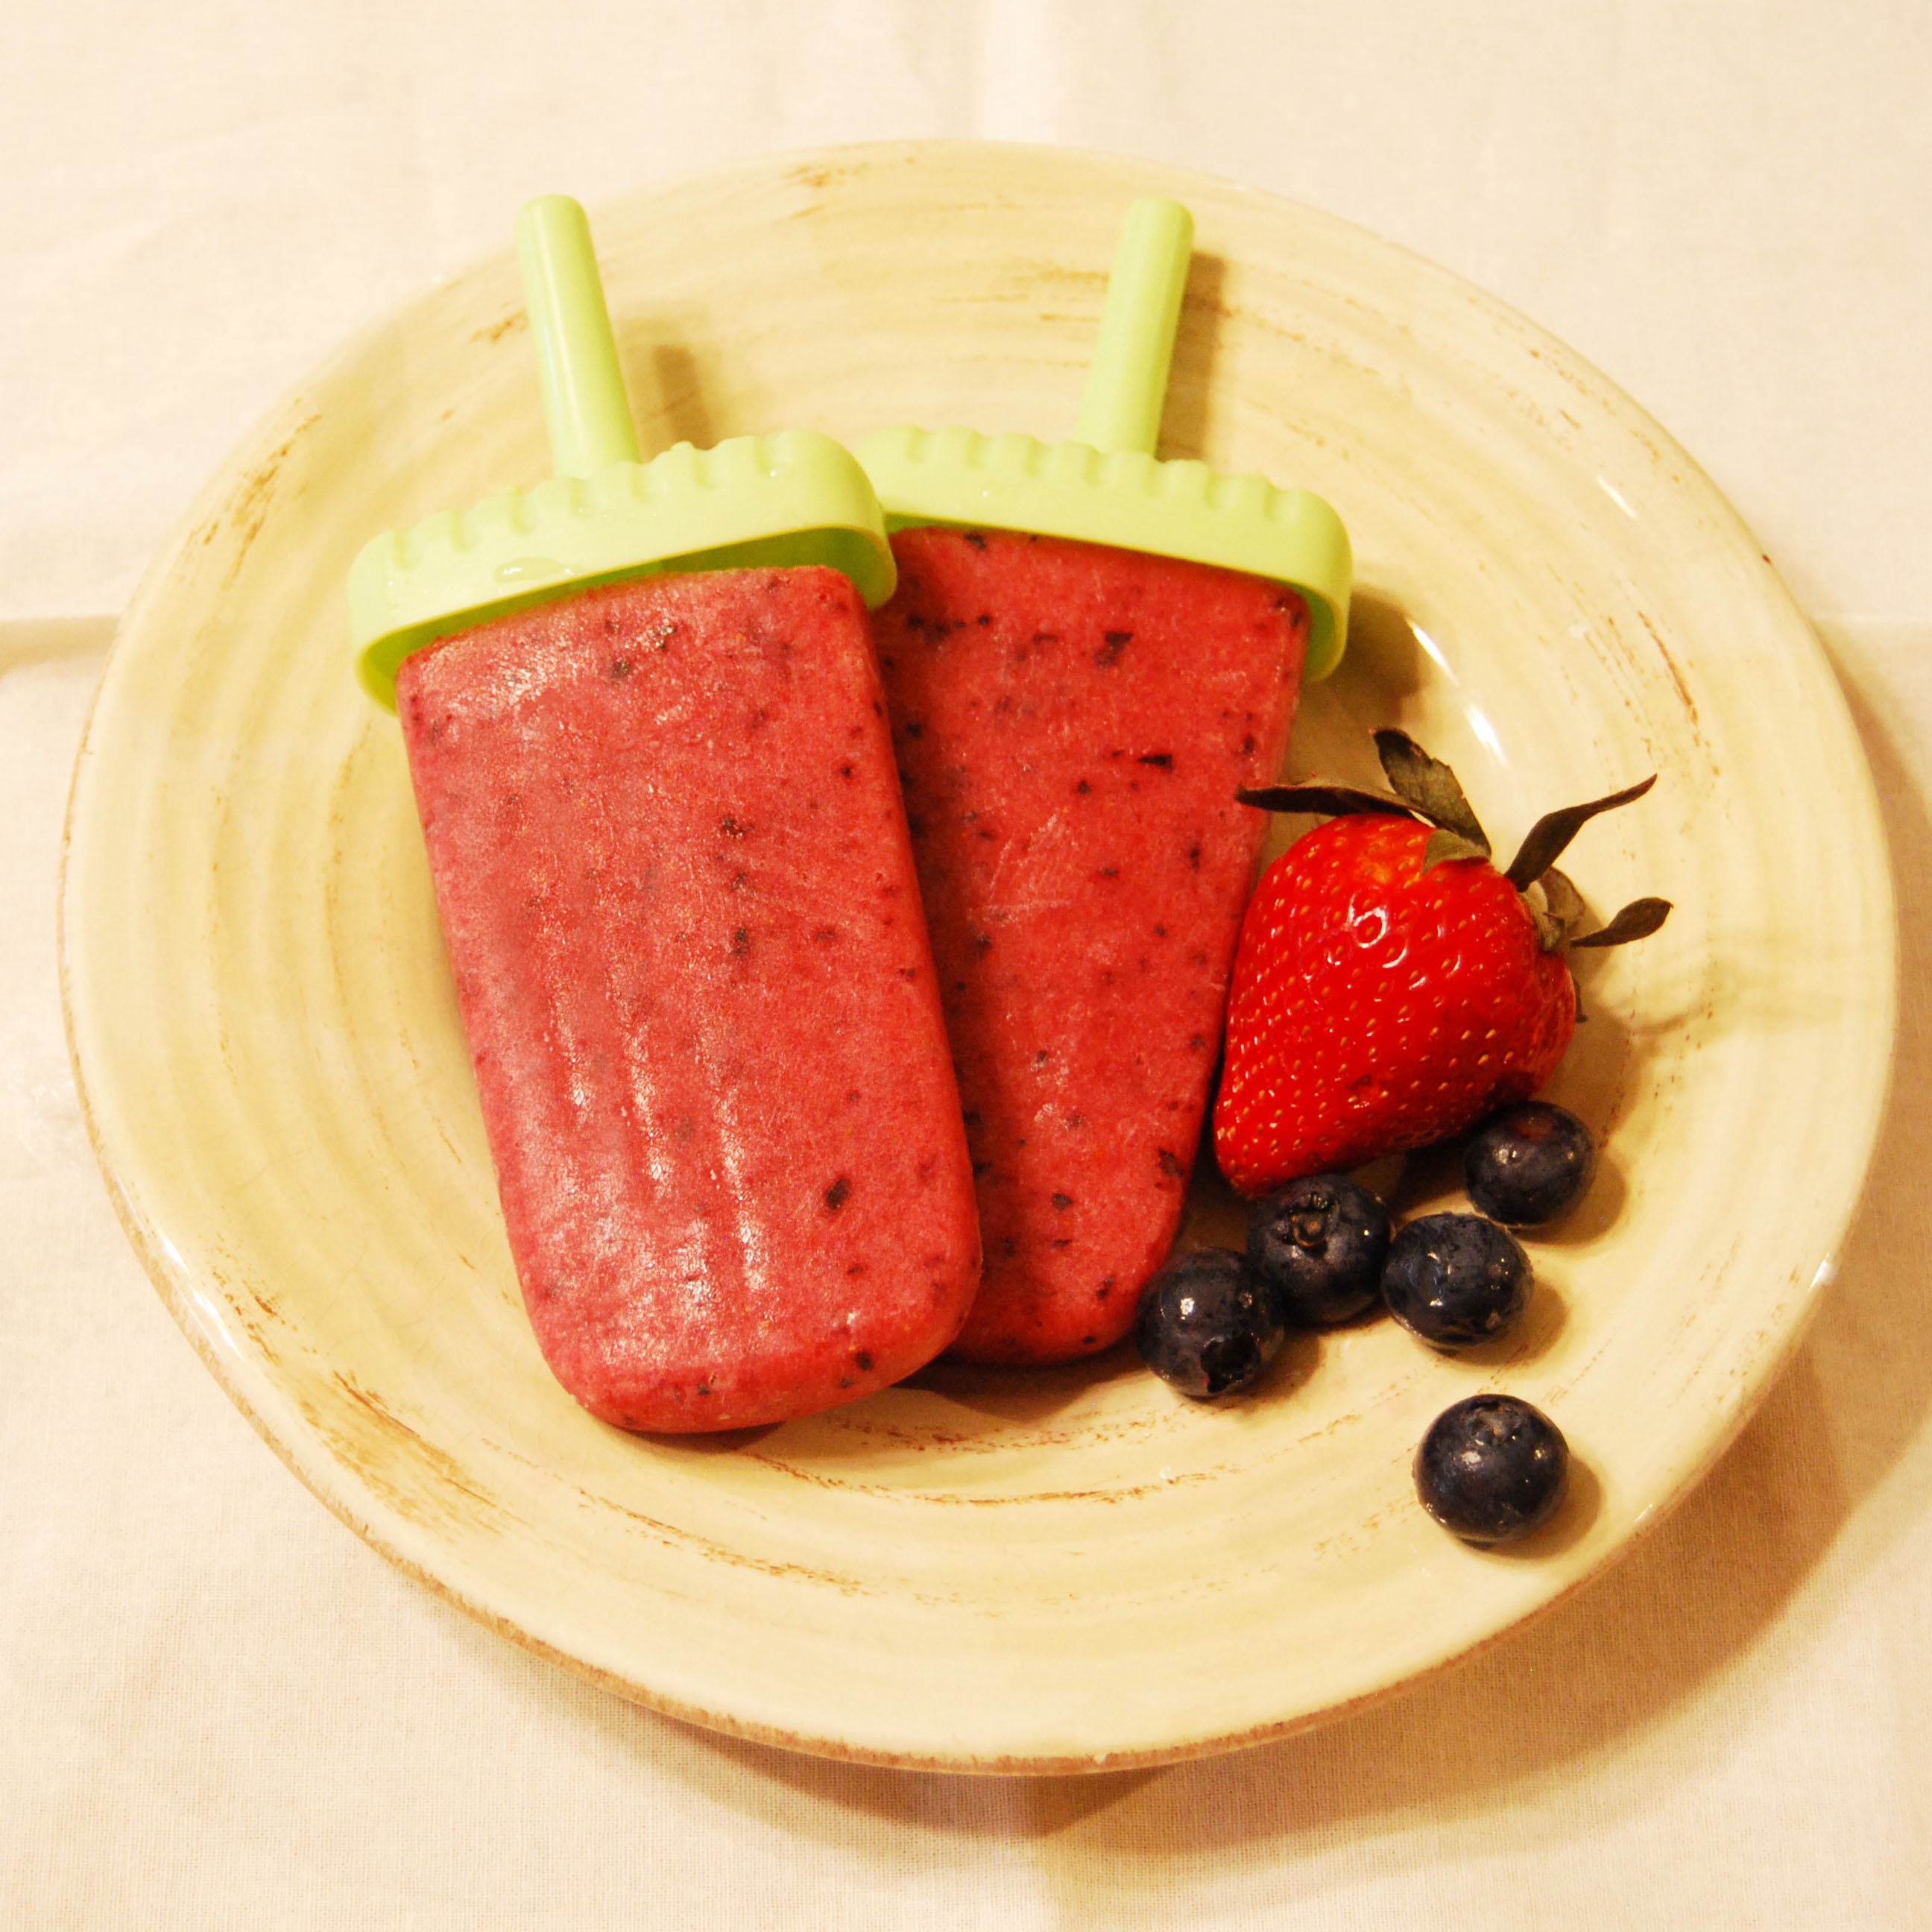 These Healthy Strawberry Apple Ice Pops are the perfect treat any time of day! This recipe is made with only fruit and no added sugar, and is a healthier alternative to Popsicles and ice cream, perfect for those of us who are trying to trim down for summer swim suits! Strawberries and apples are a yummy combination for this delicious treat, and instead of sugar, we've just added more fruit! This easy recipe will have you in and out of the kitchen in minutes, and you will love the flavor of this icy treat!